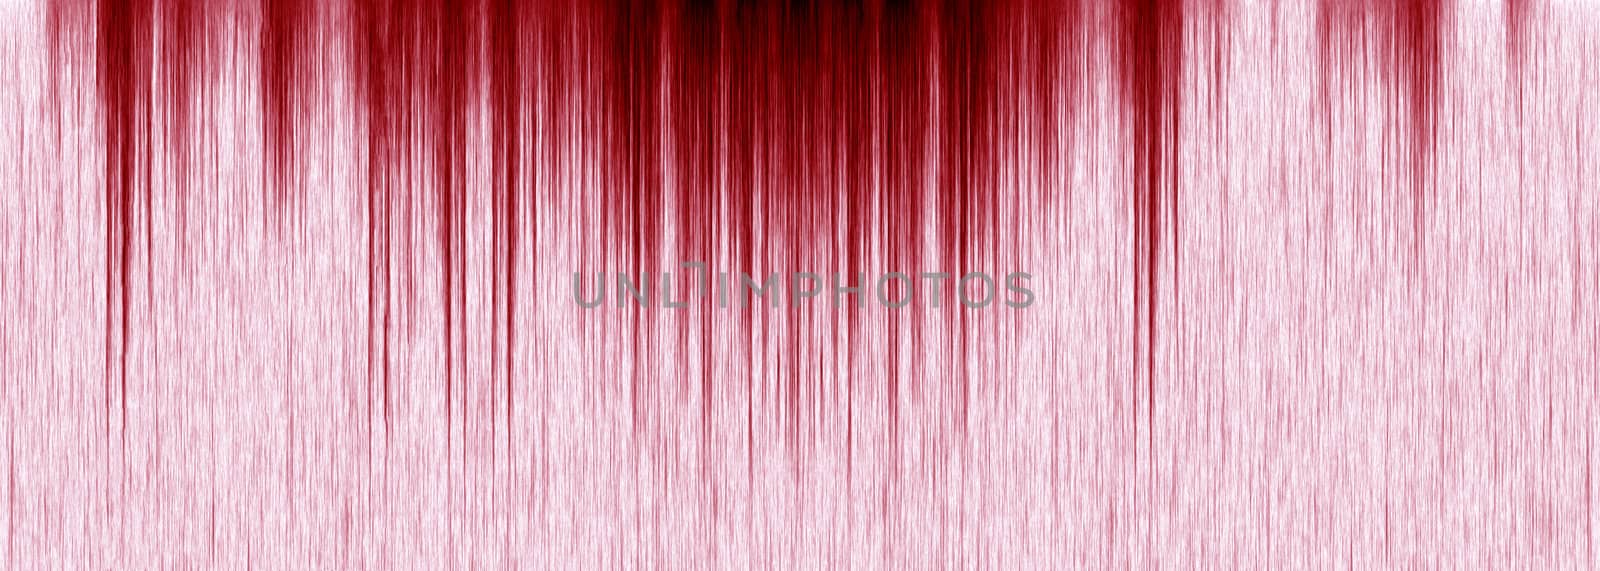 Abstract metal surface with red paint leaking down the surface. Panoramic view. Banner.